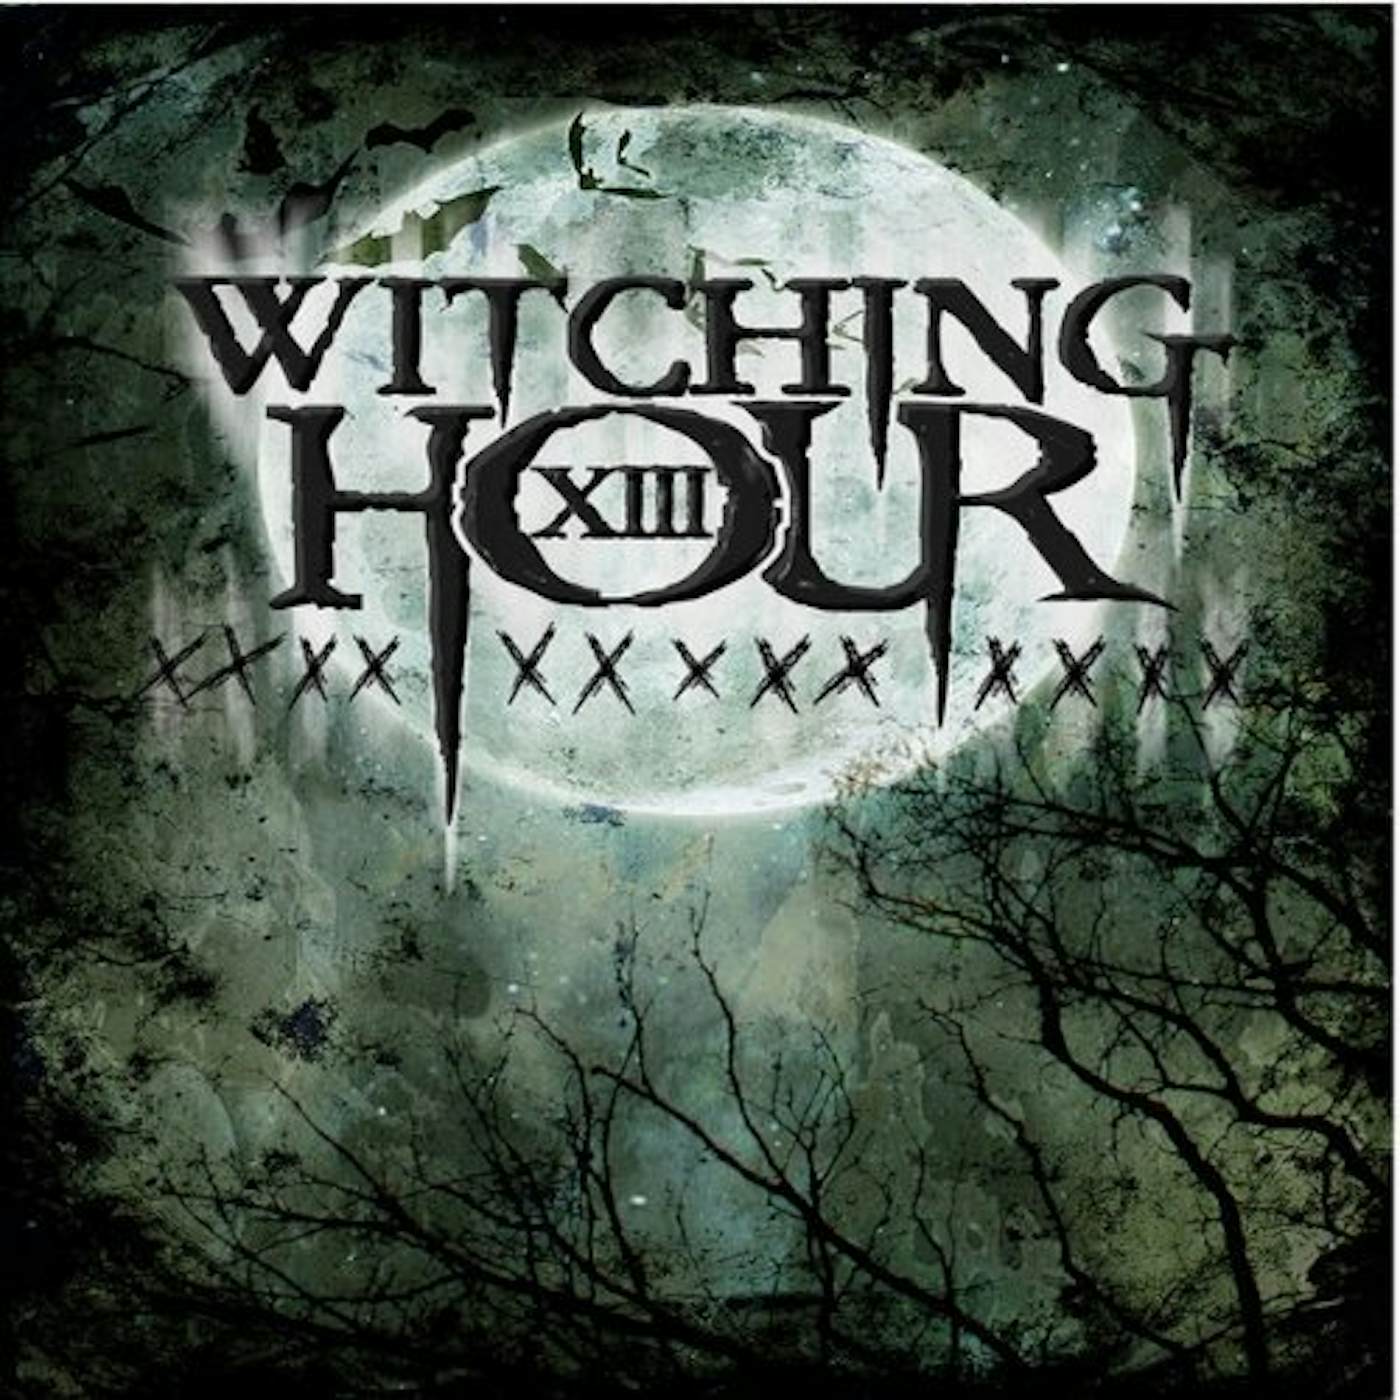 The Witching Hour CD